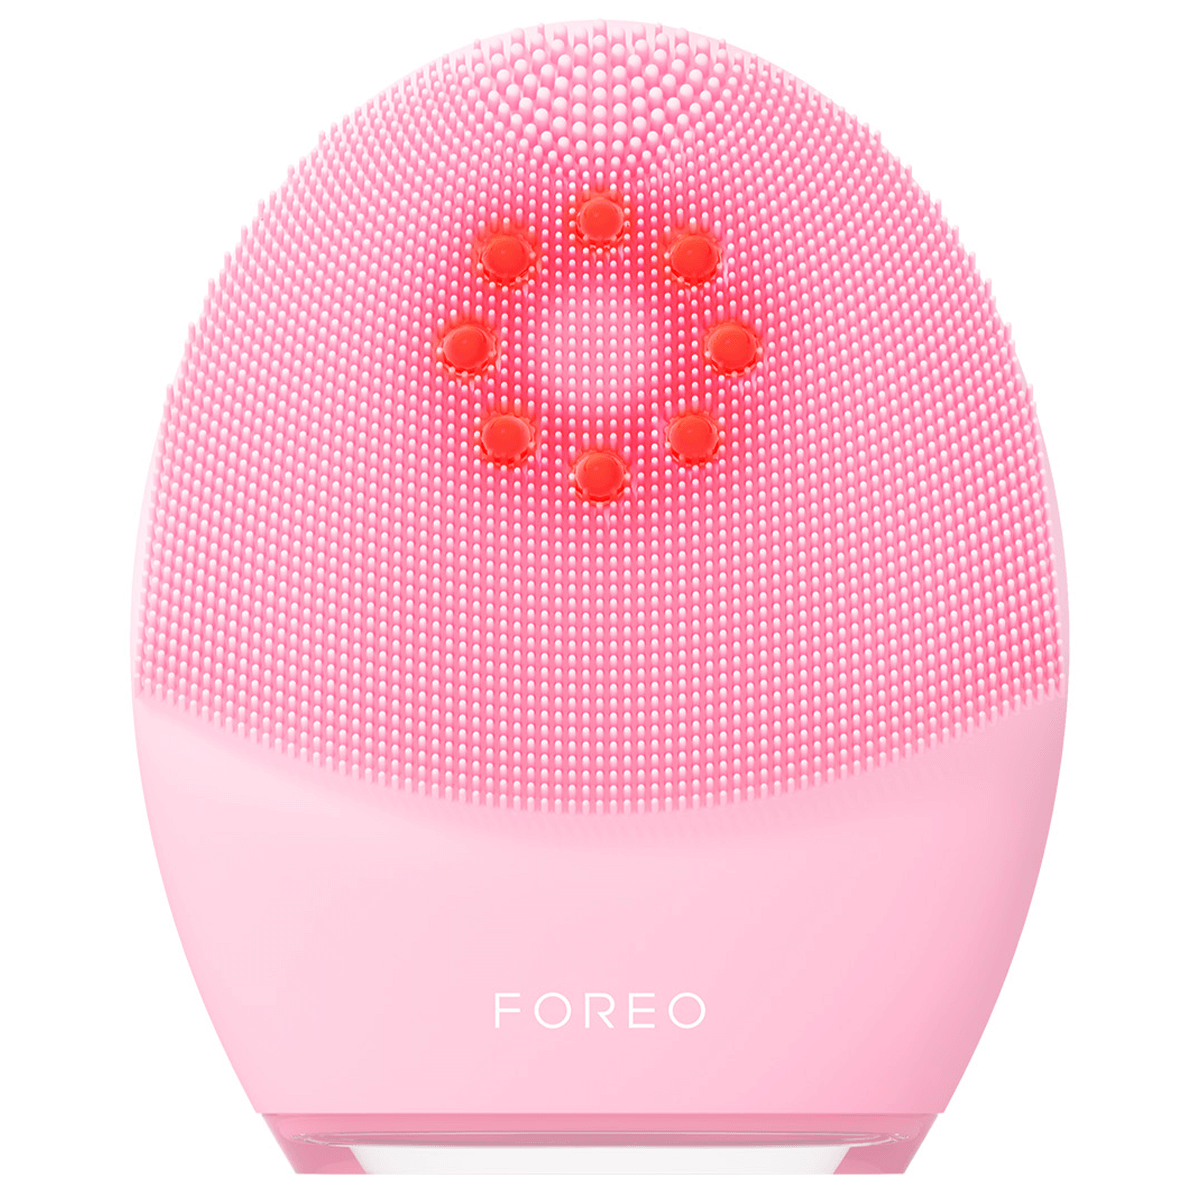 FOREO LUNA 4 Plus Smart Facial Cleansing & Anti-Ageing Device - Sensitive Skin